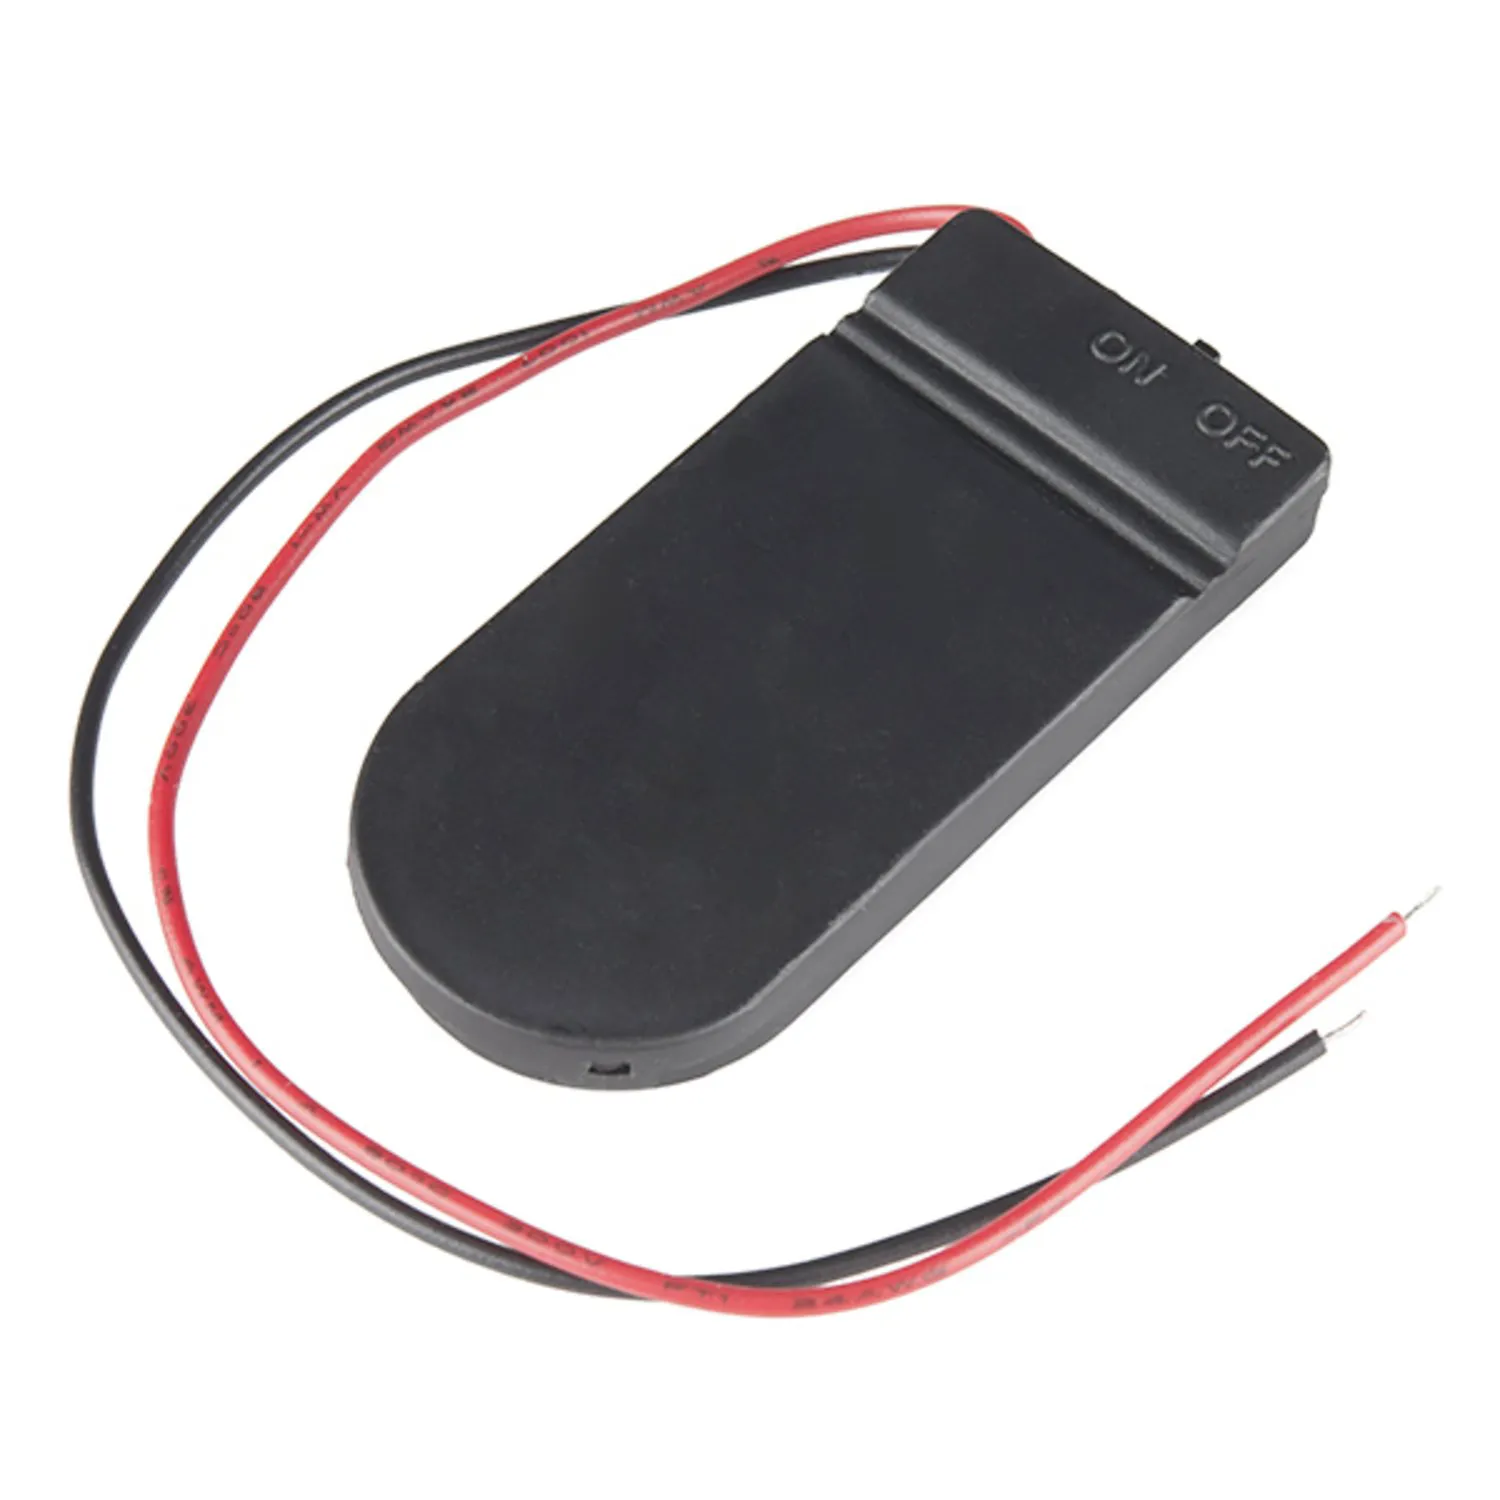 Photo of Coin Cell Battery Holder - 2xCR2032 (Enclosed)